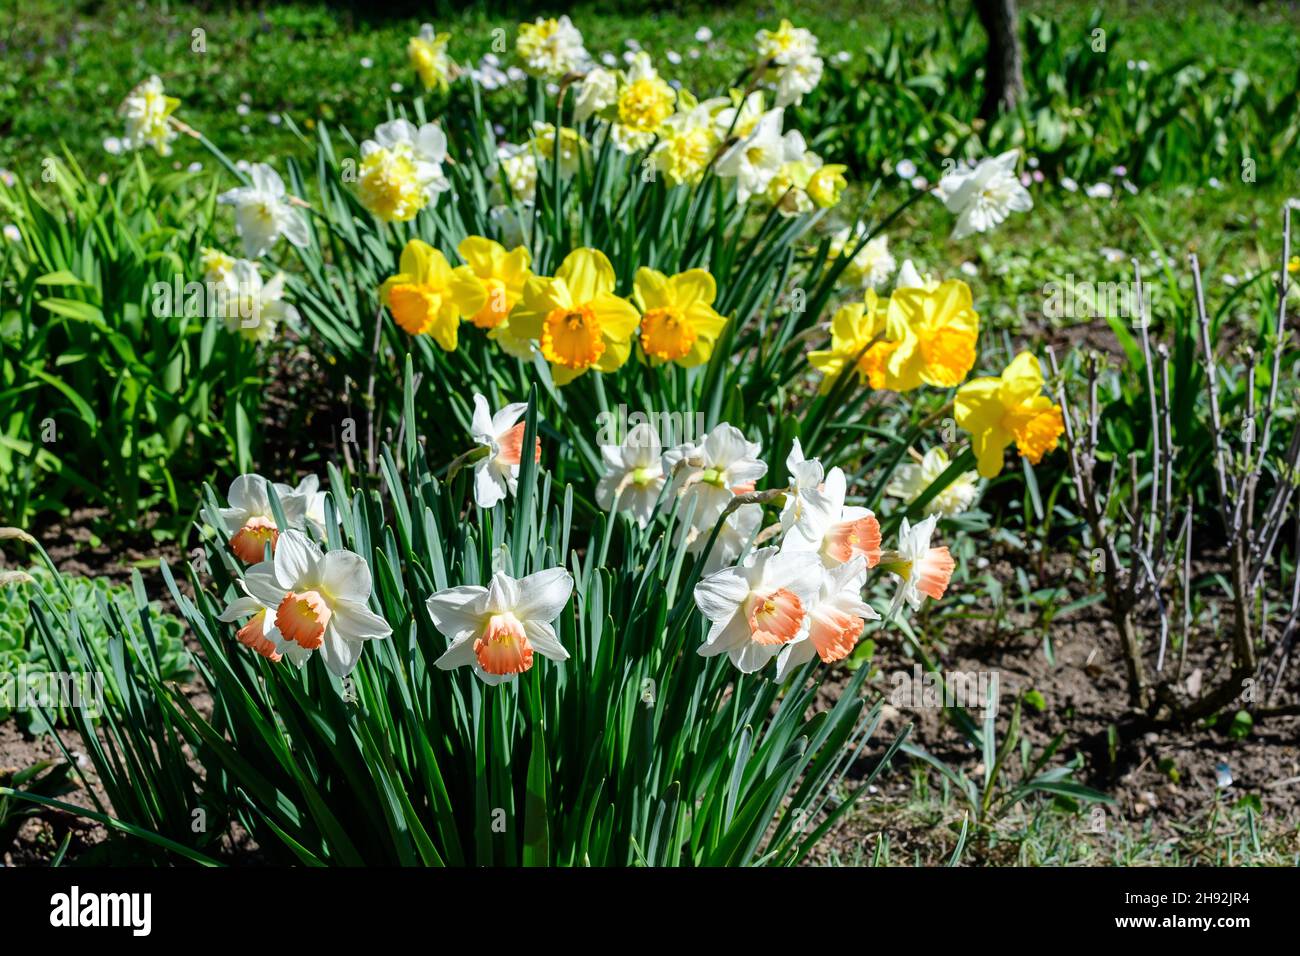 Group of delicate white and vidid yellow daffodil flowers in full bloom with blurred green grass, in a sunny spring garden, beautiful outdoor floral b Stock Photo